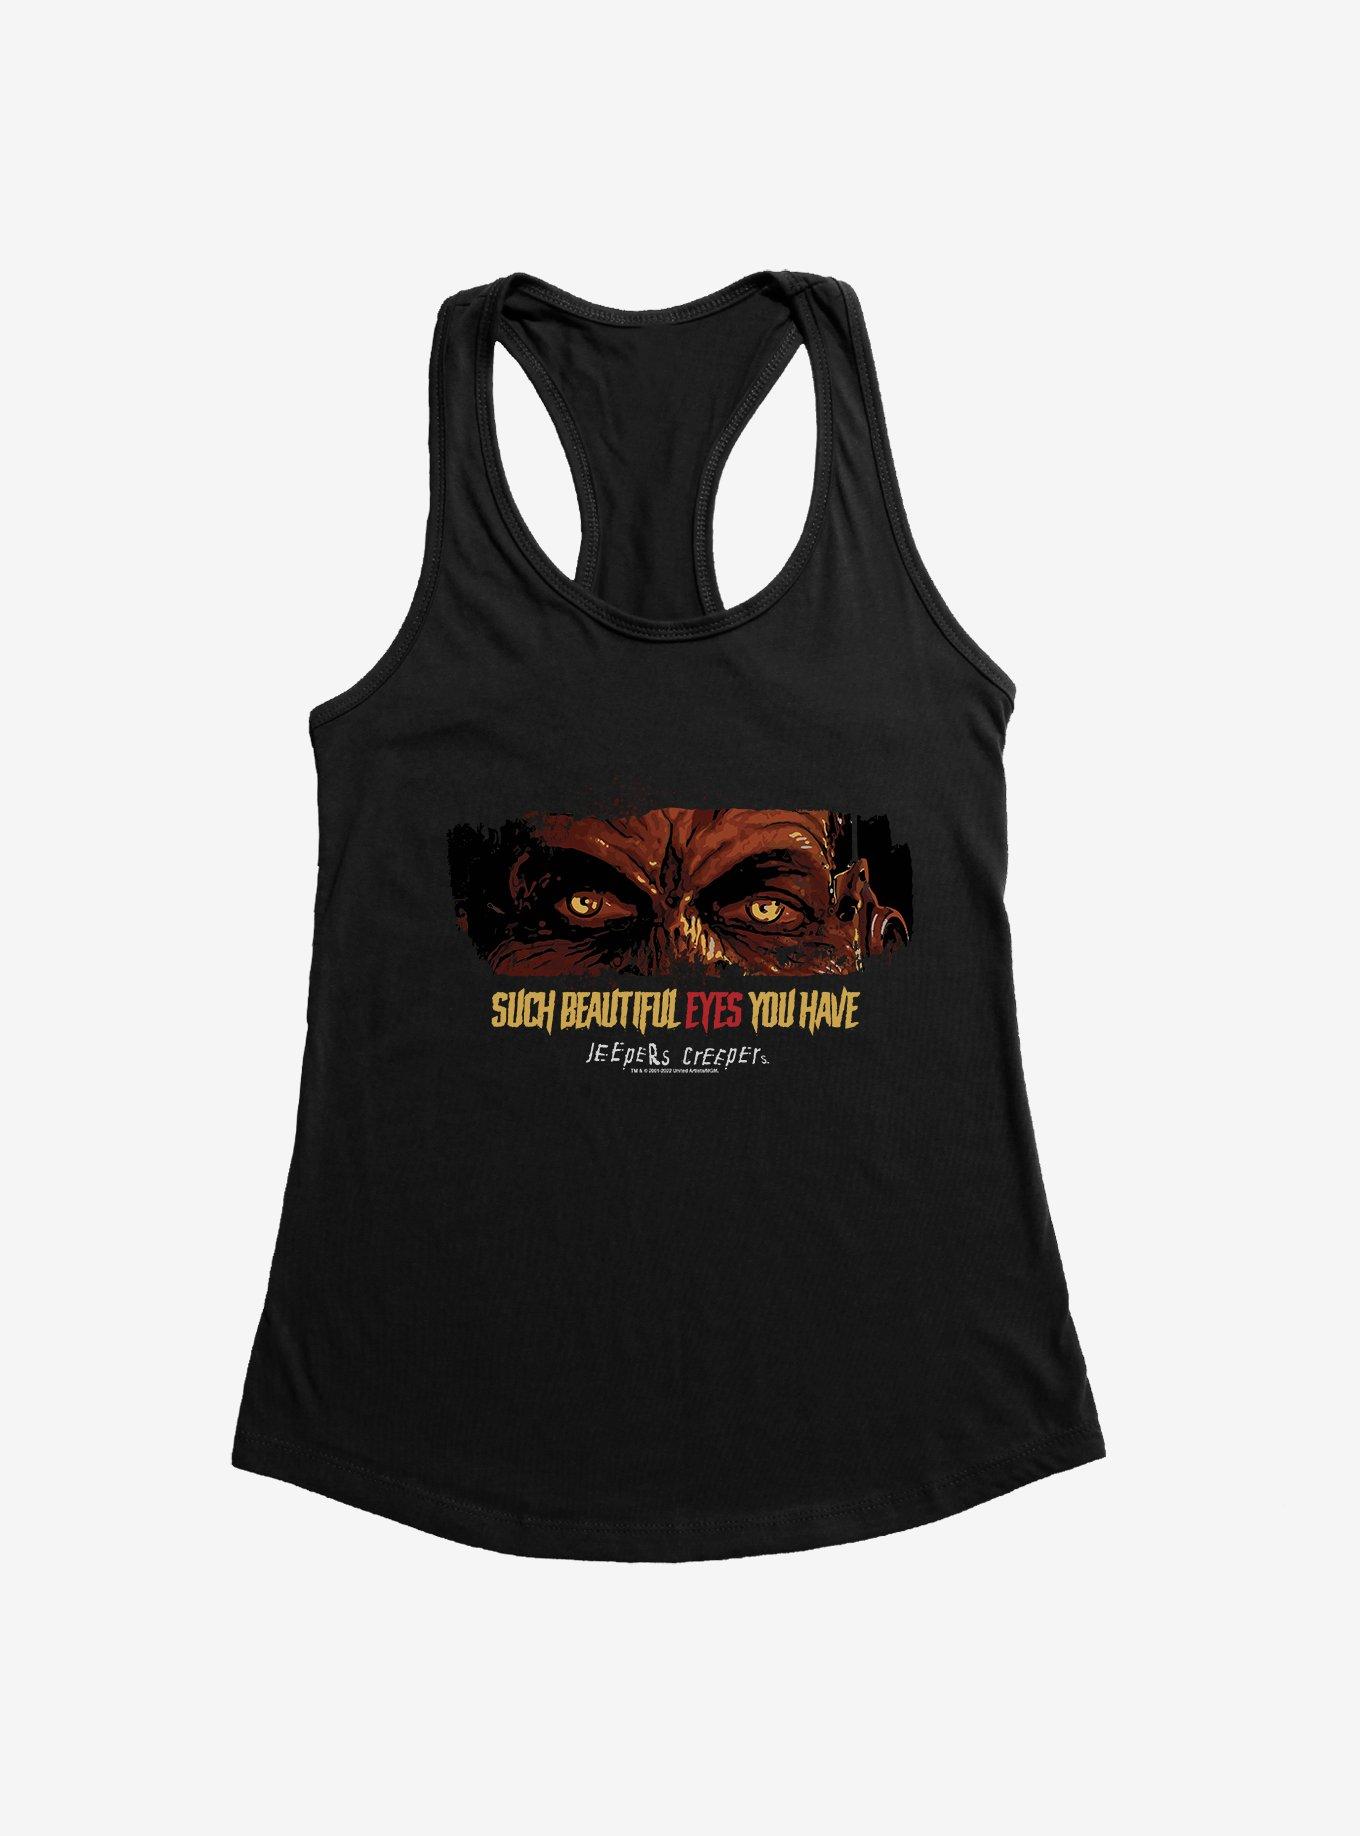 Jeepers Creepers Beautiful Eyes Womens Tank Top, BLACK, hi-res